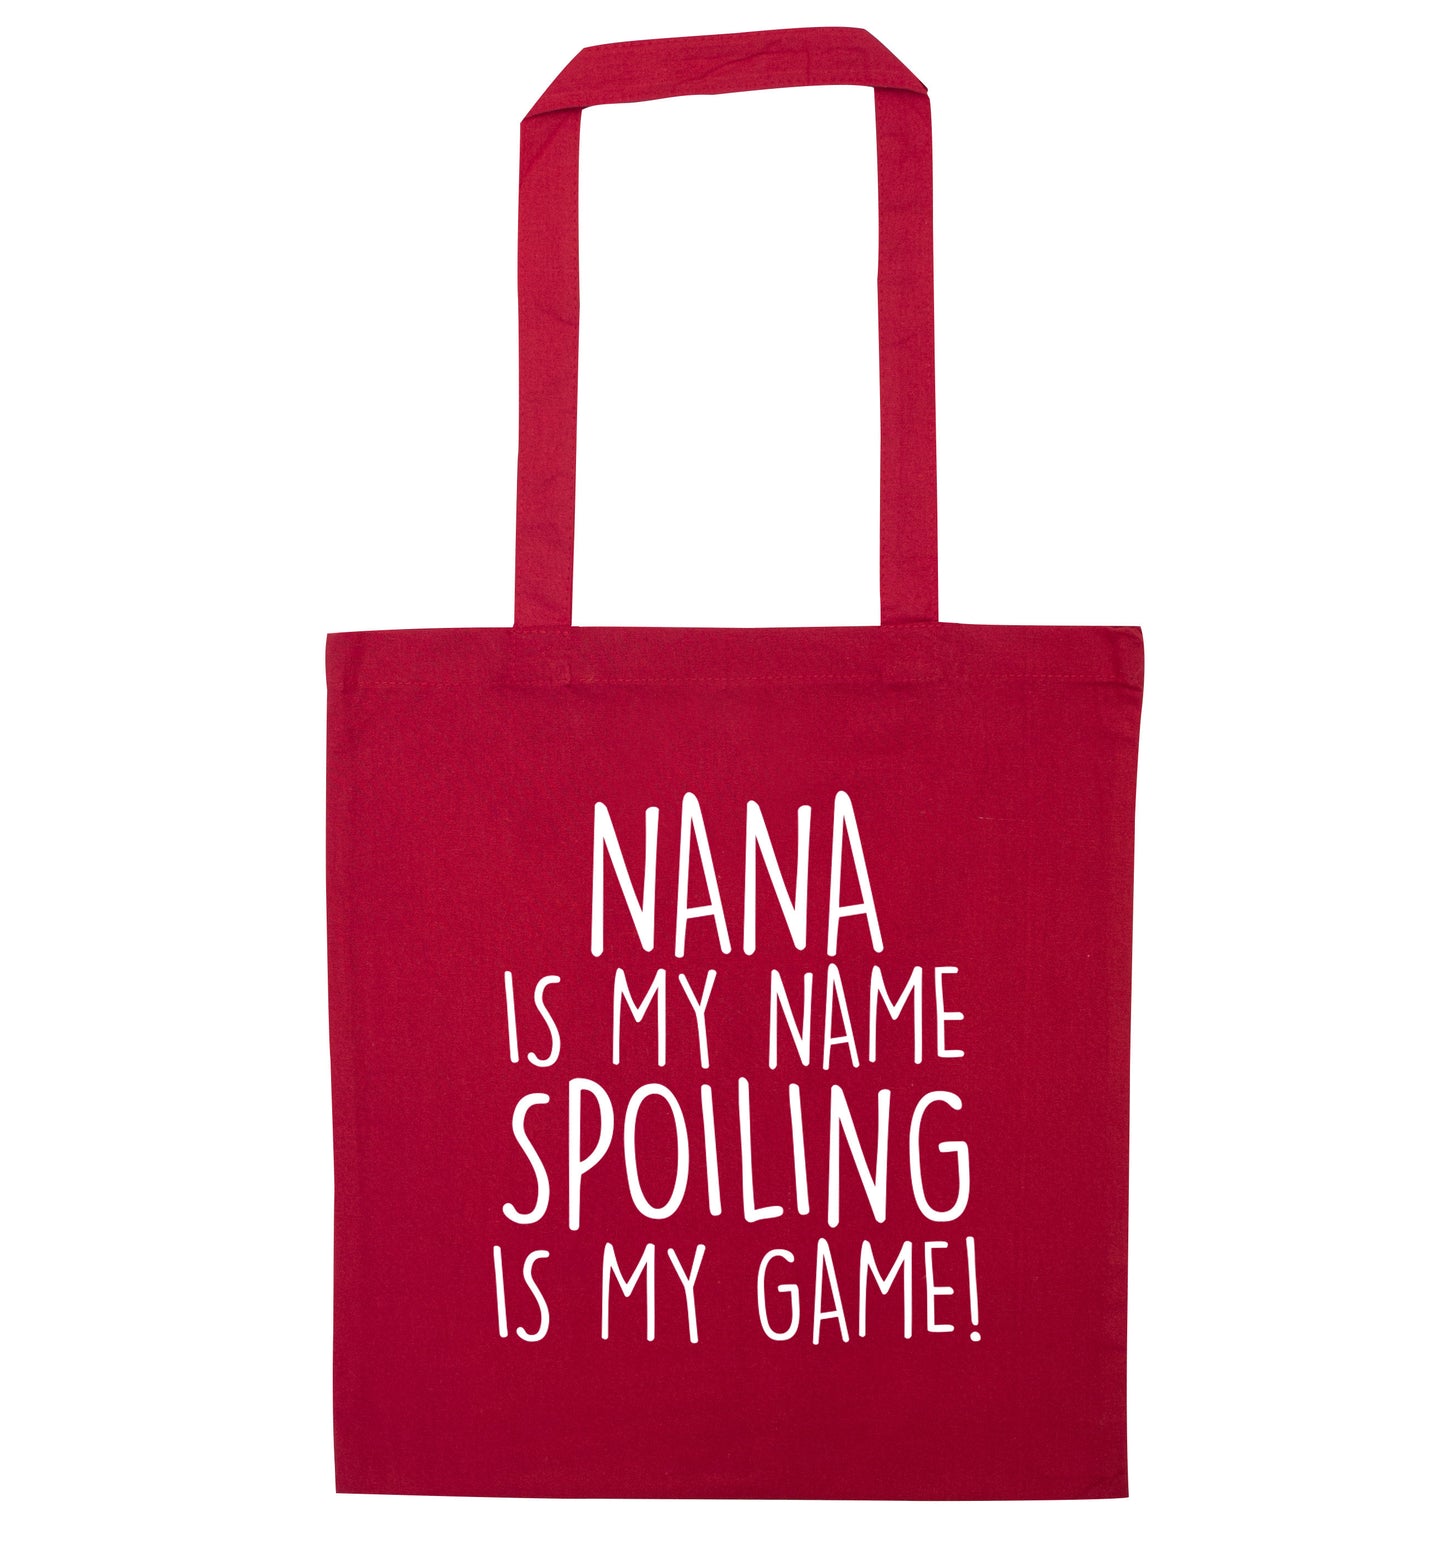 Nana is my name, spoiling is my game red tote bag